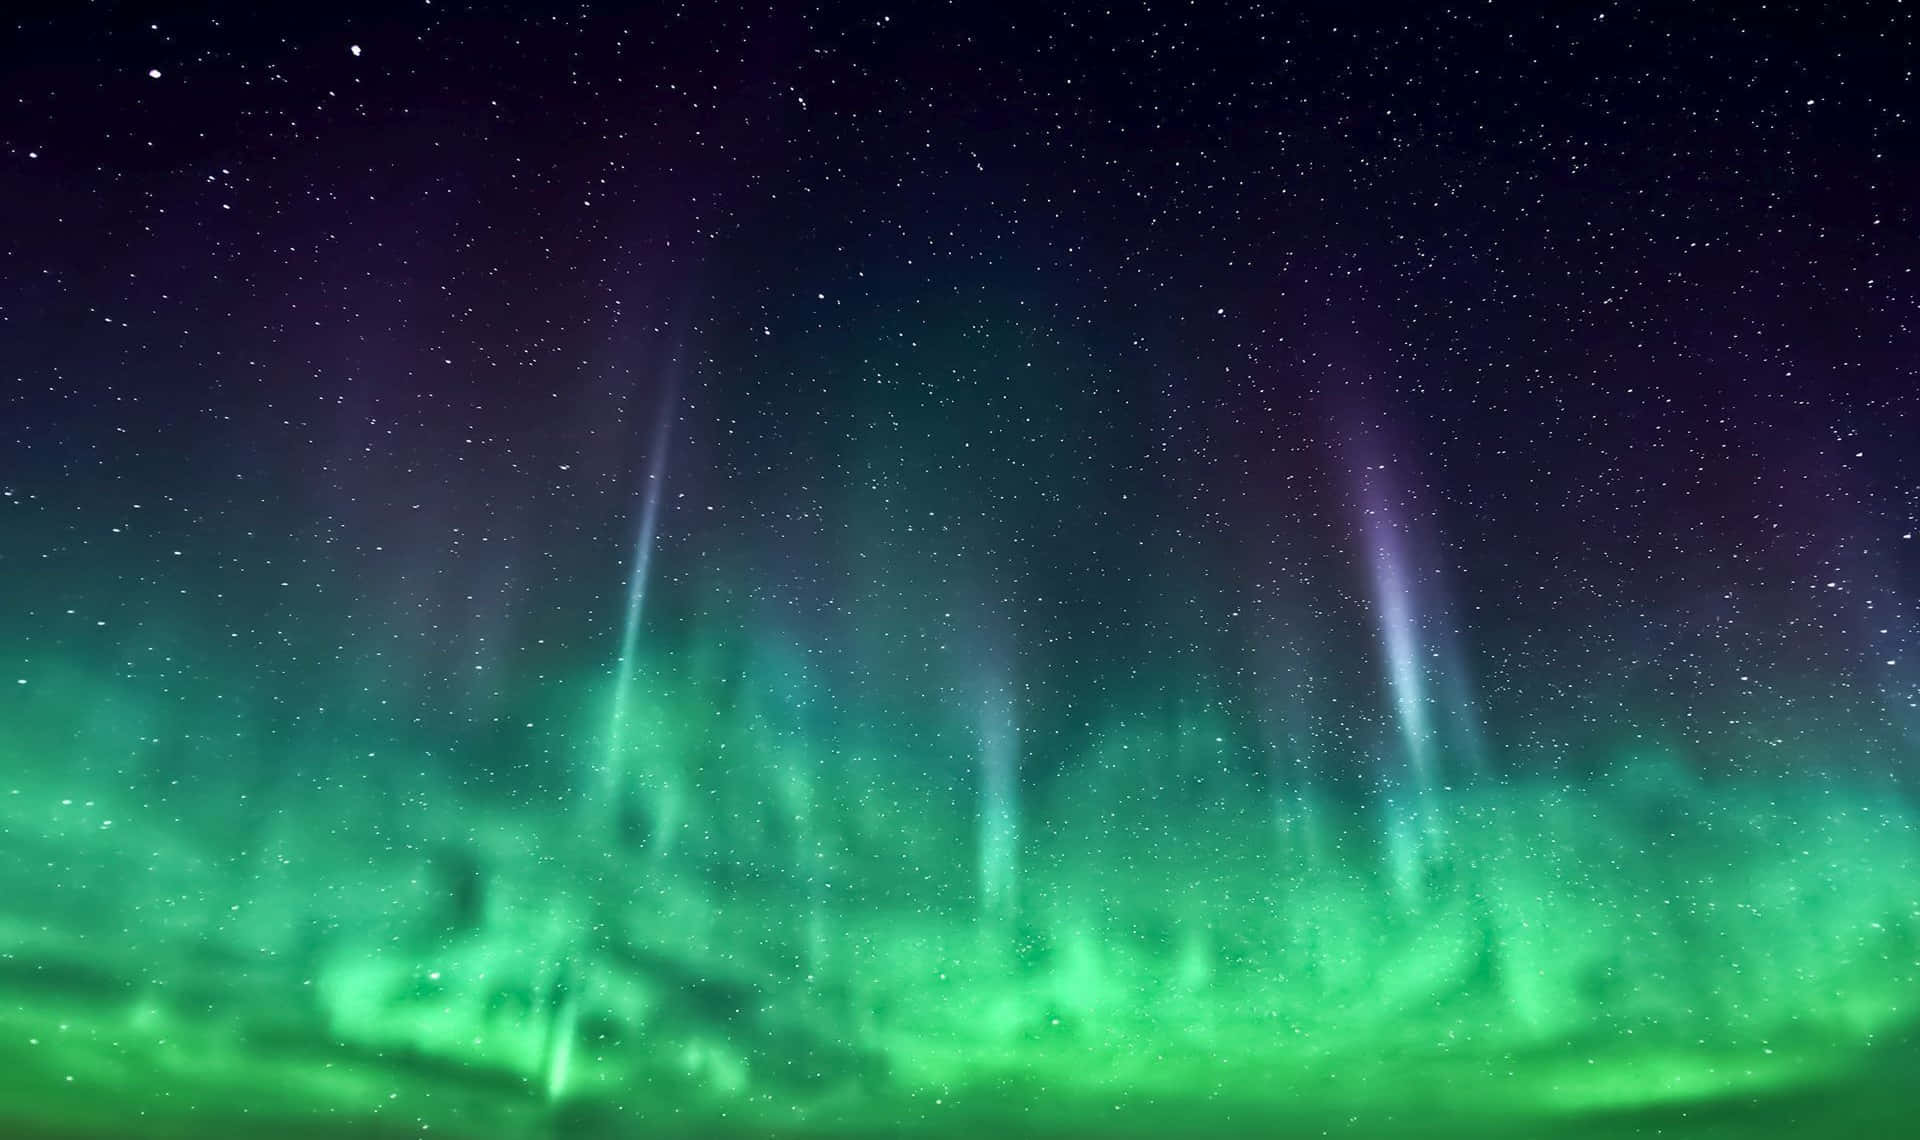 The magical appearance of the Aurora Borealis in the night sky